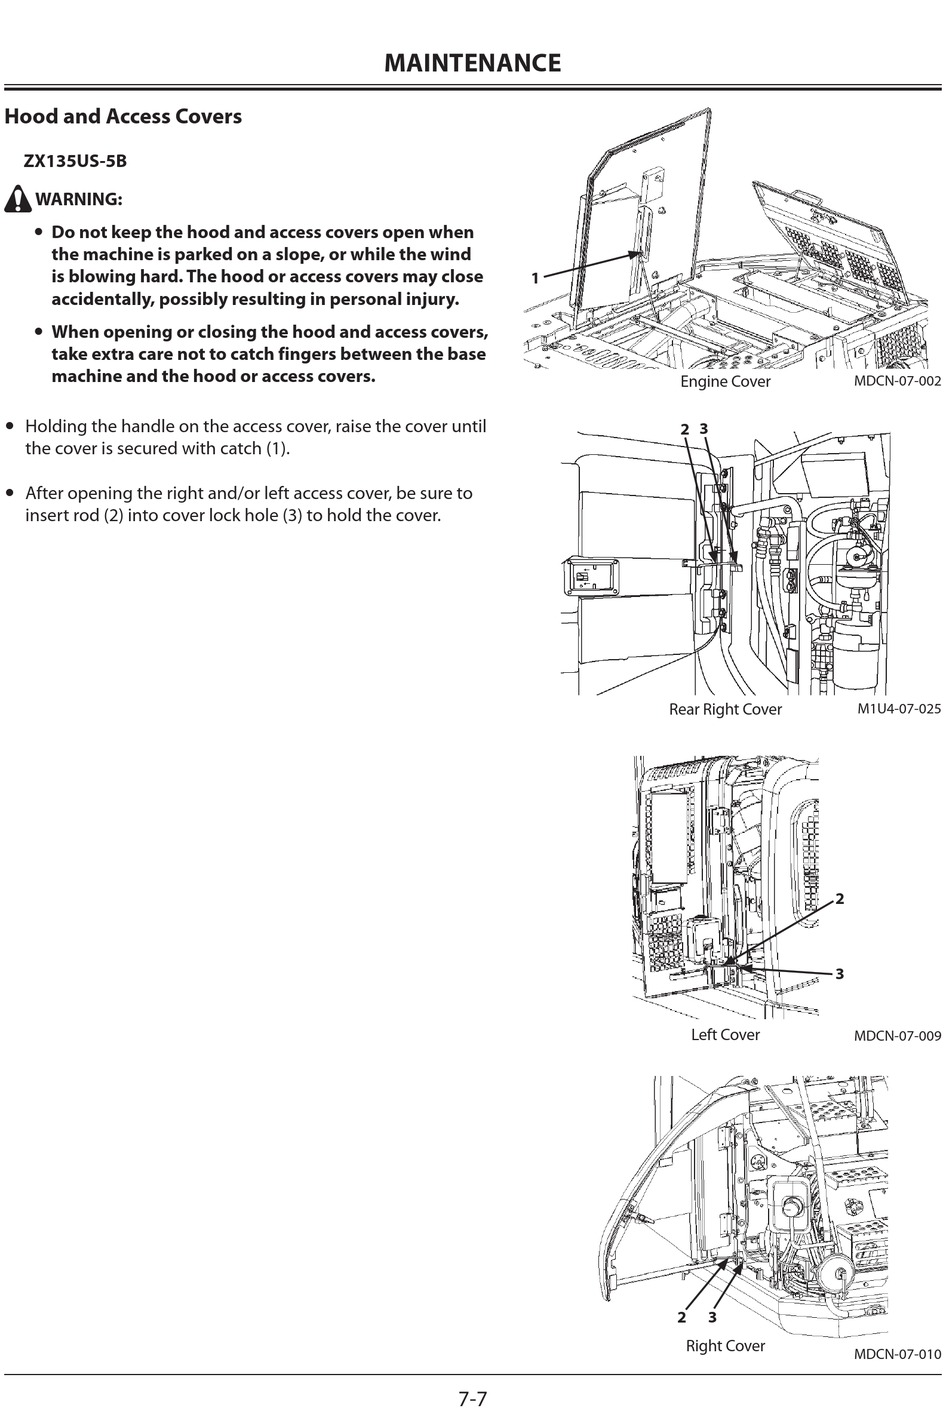 Hood And Access Covers - Hitachi ZAXIS 135US-5B Operator's Manual 